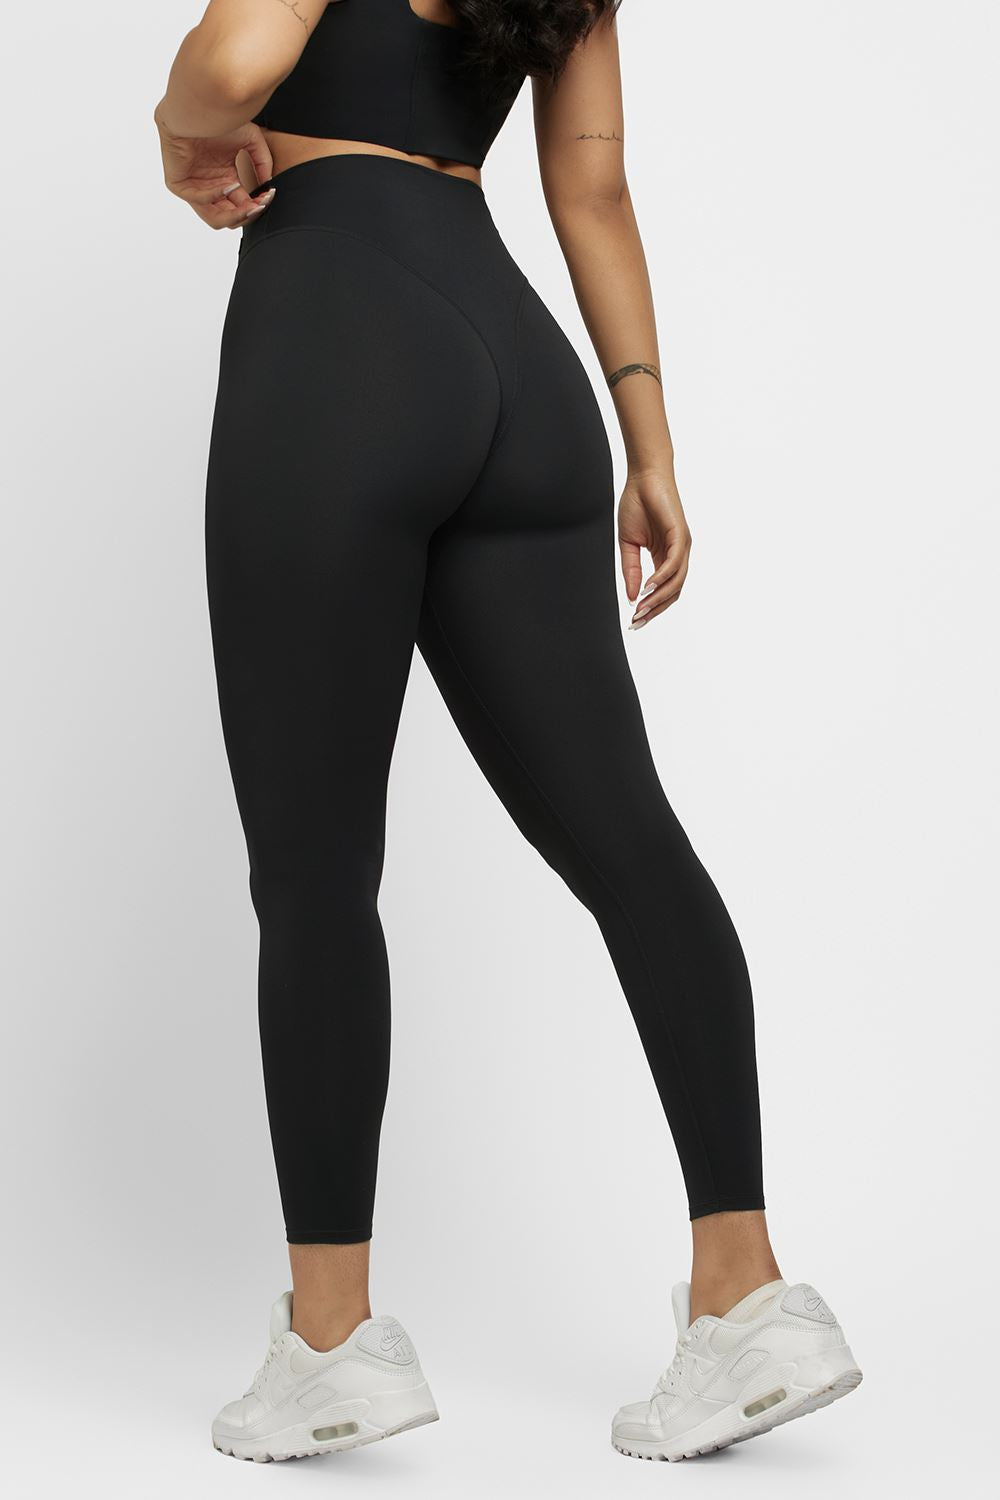 The first of a kind Shapewear leggings by Adorna